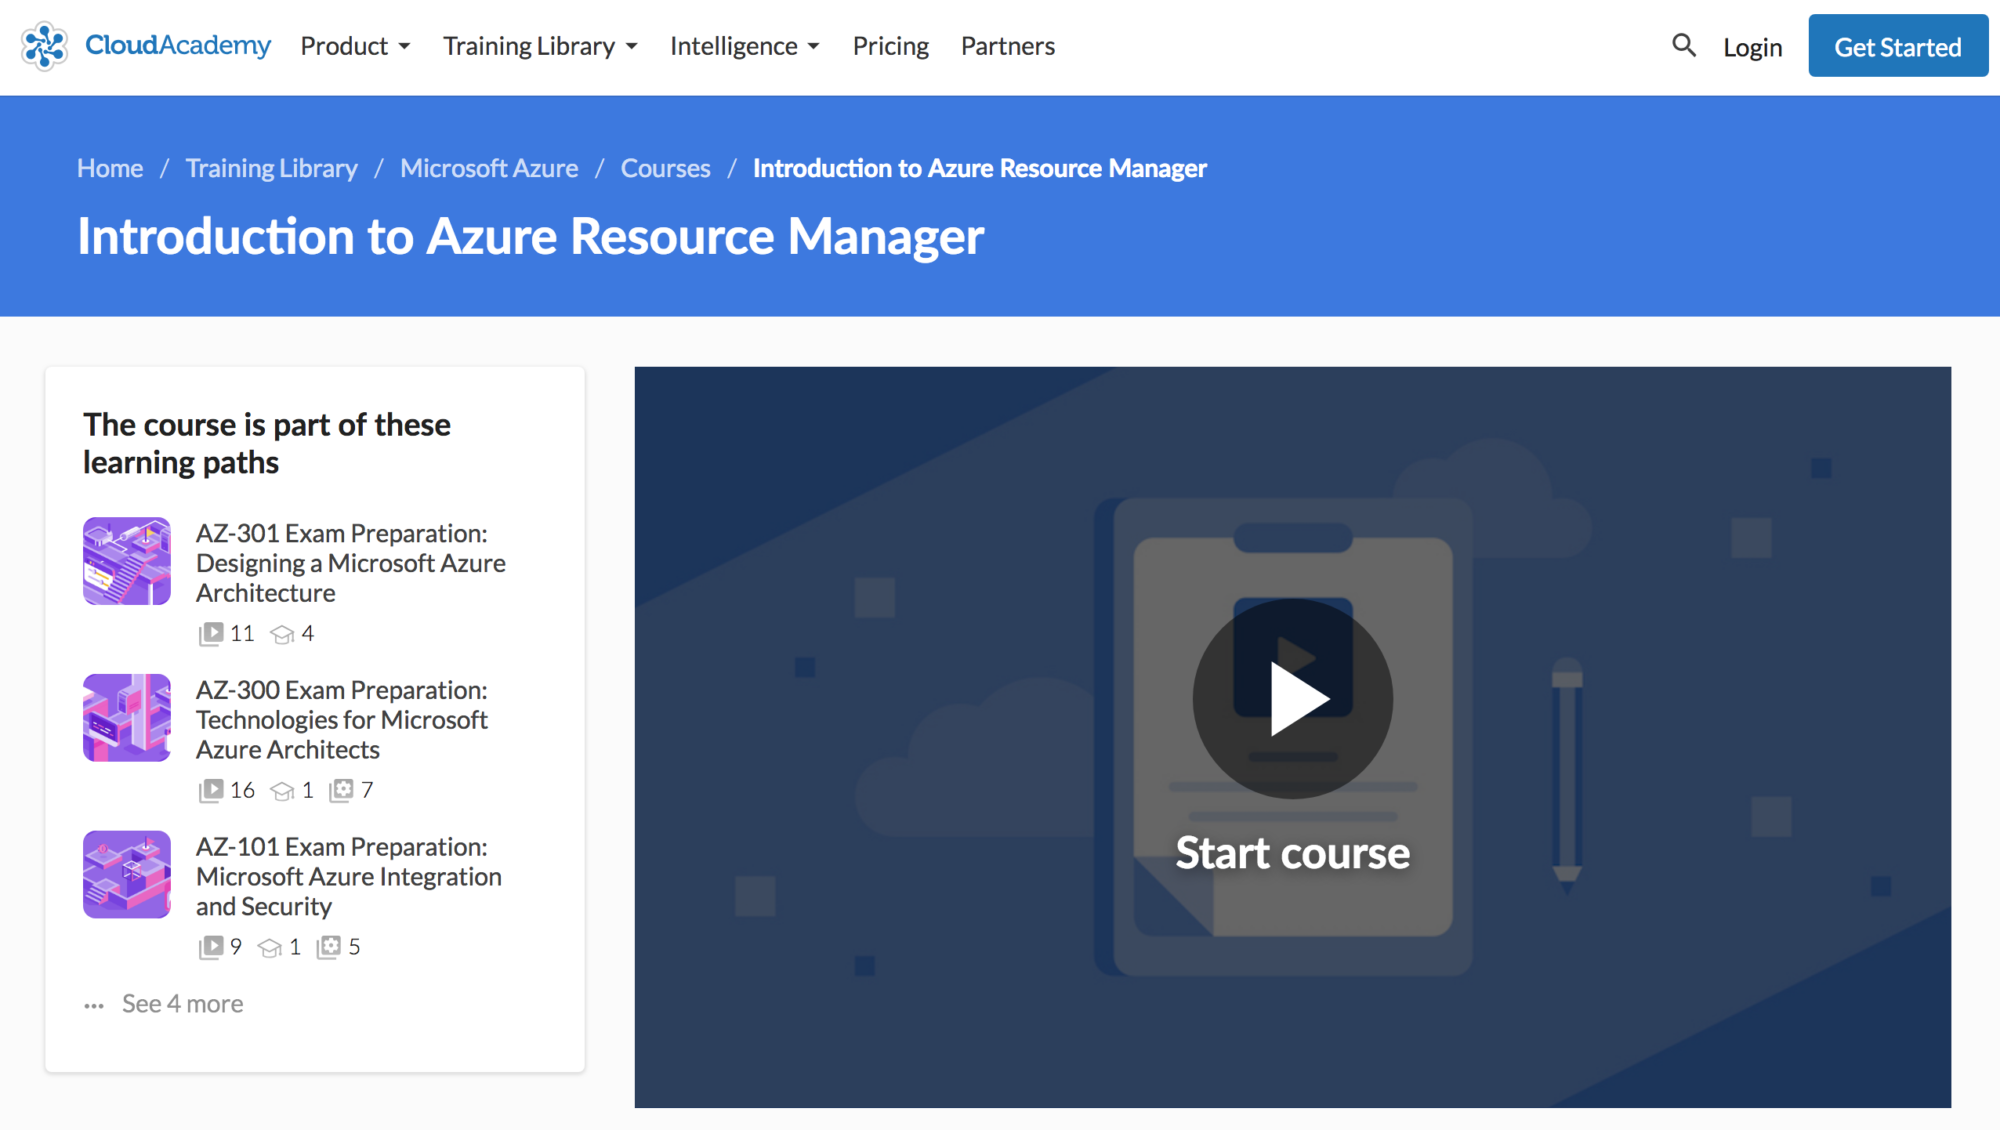 Introduction to Azure Resource Manager